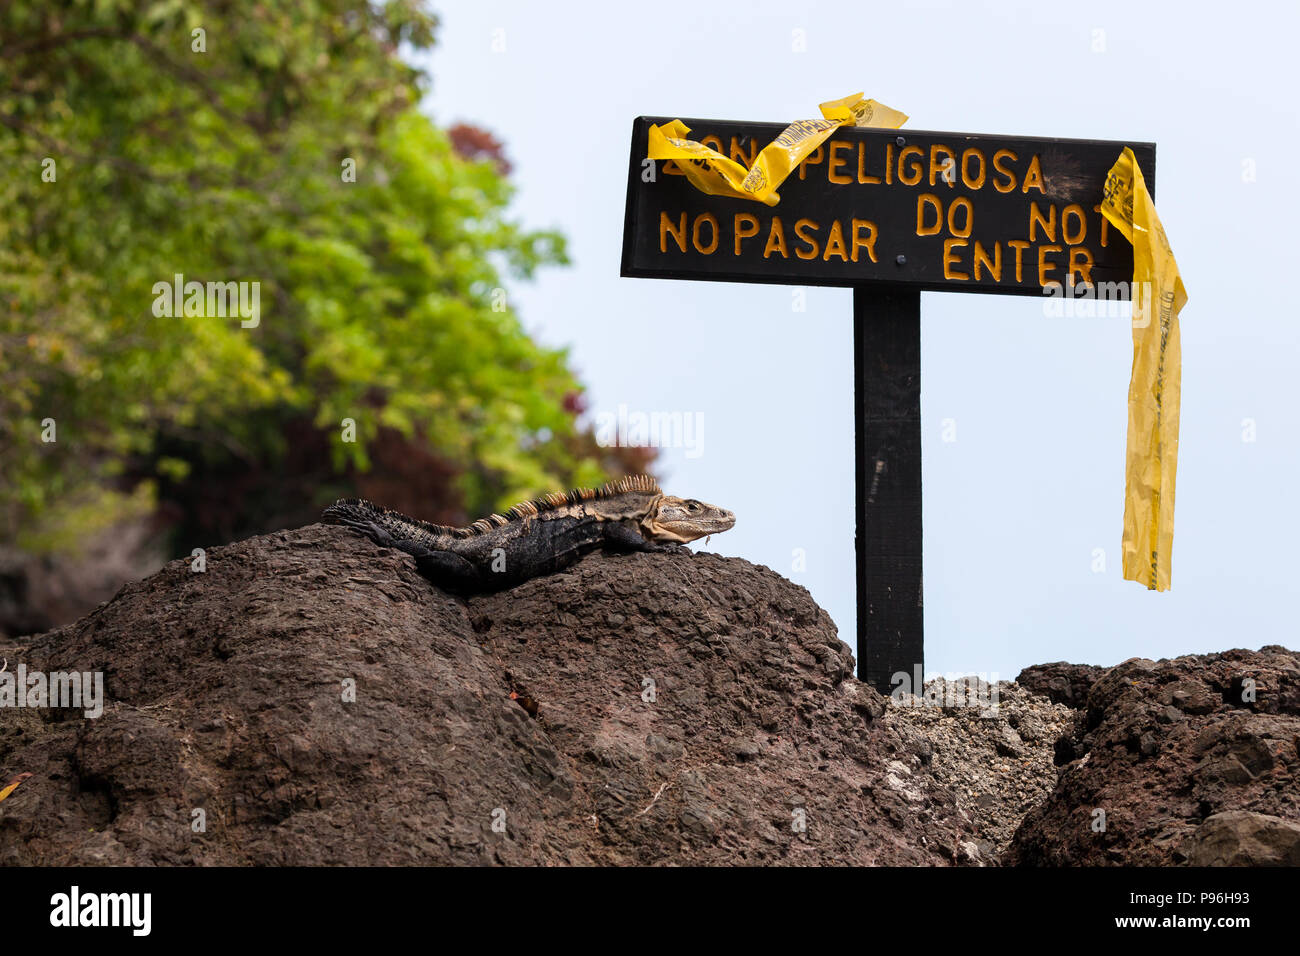 A black spiny-tailed iguana guarding a do not enter sign  in Manuel Antonio, Costa Rica. Stock Photo